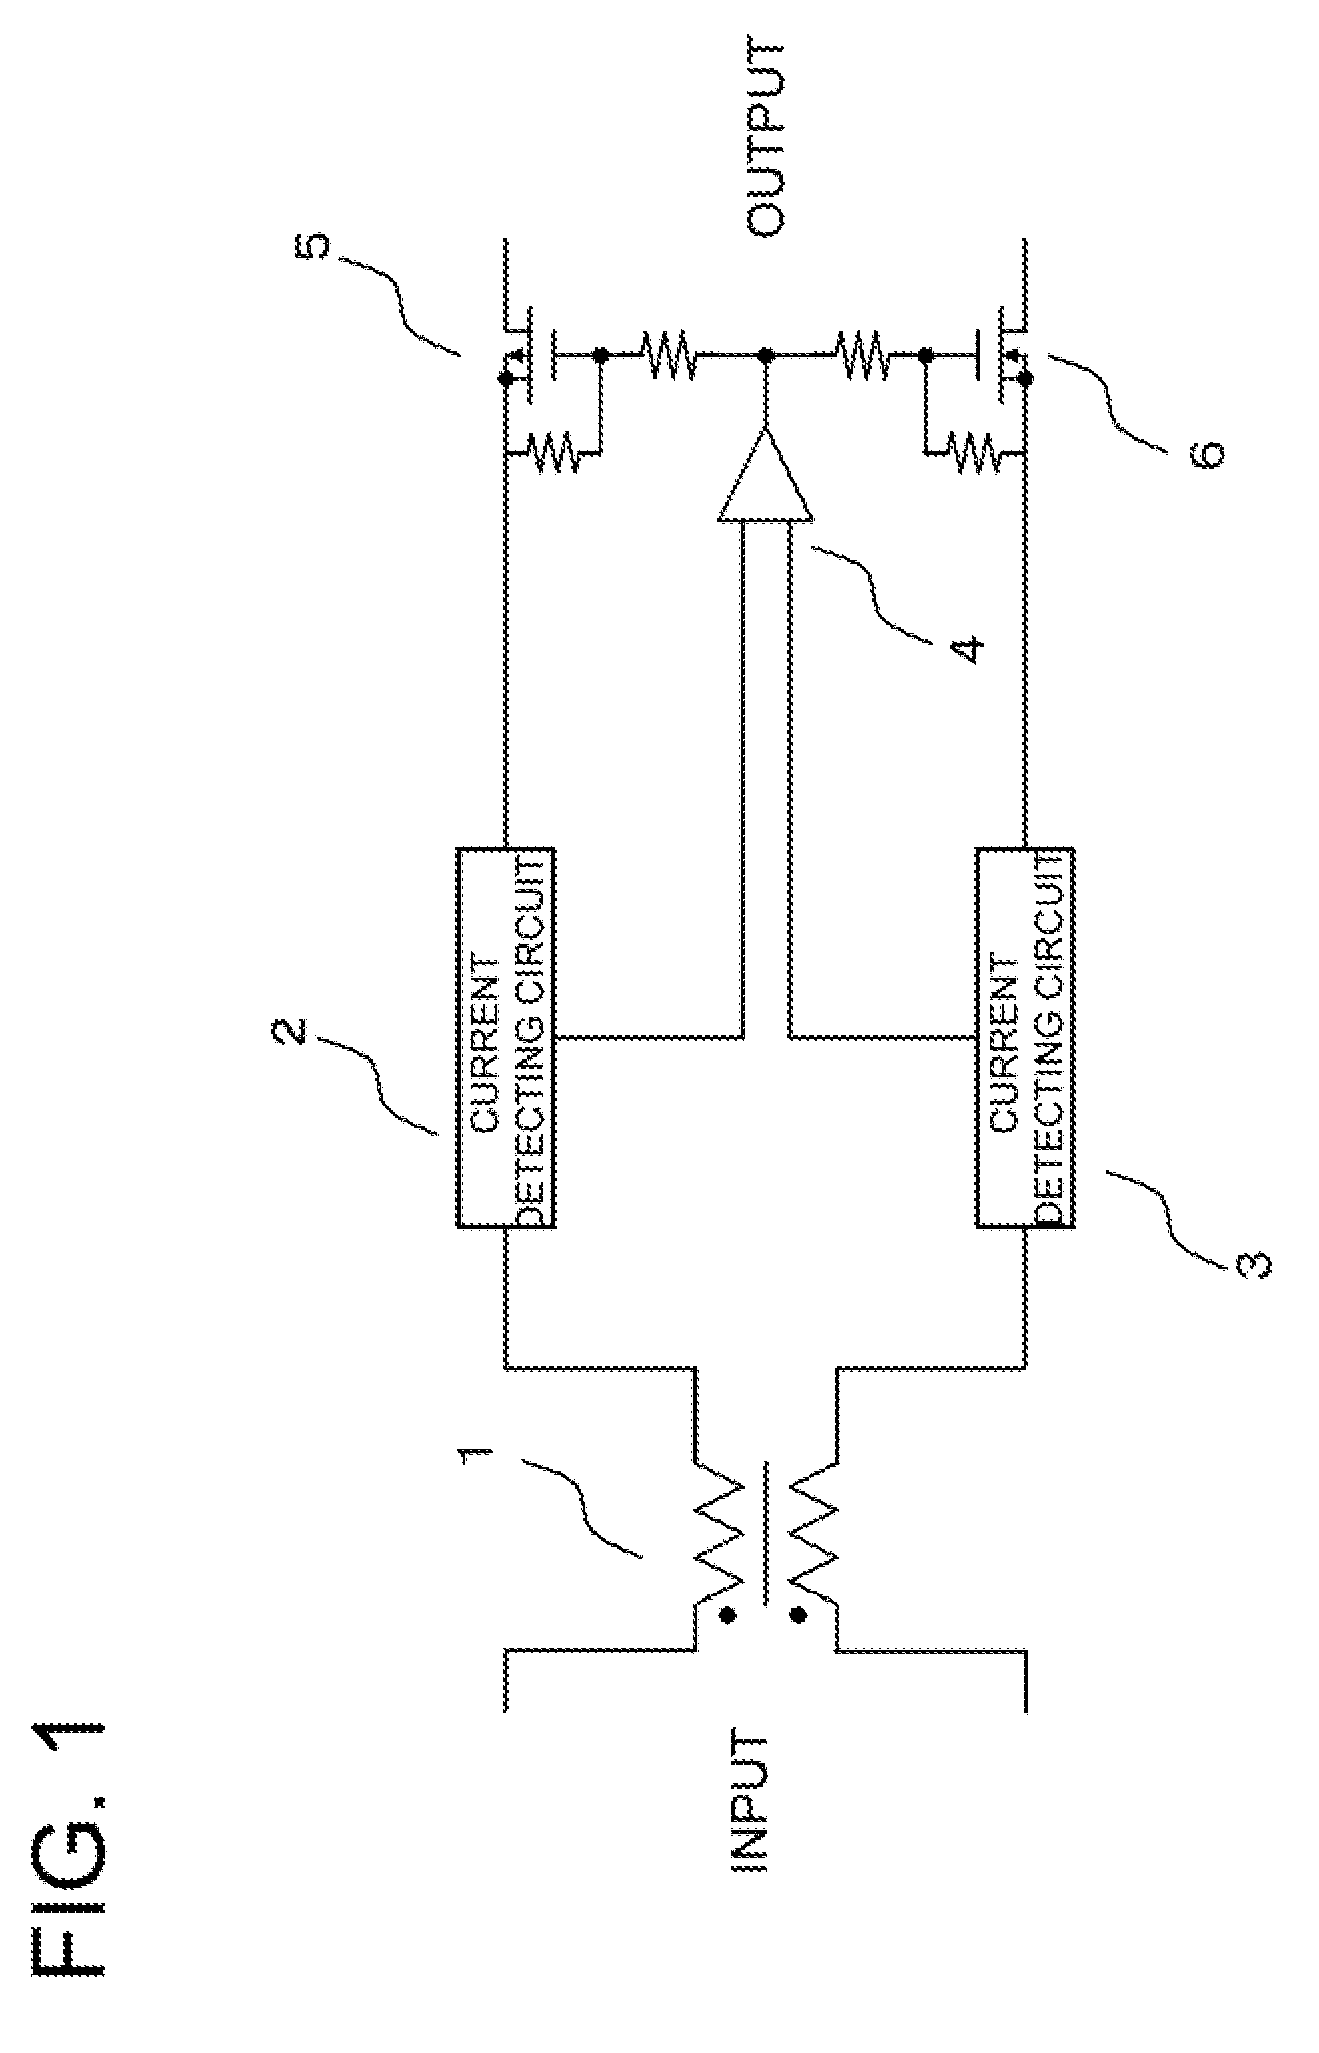 Filter circuit and method of controlling same